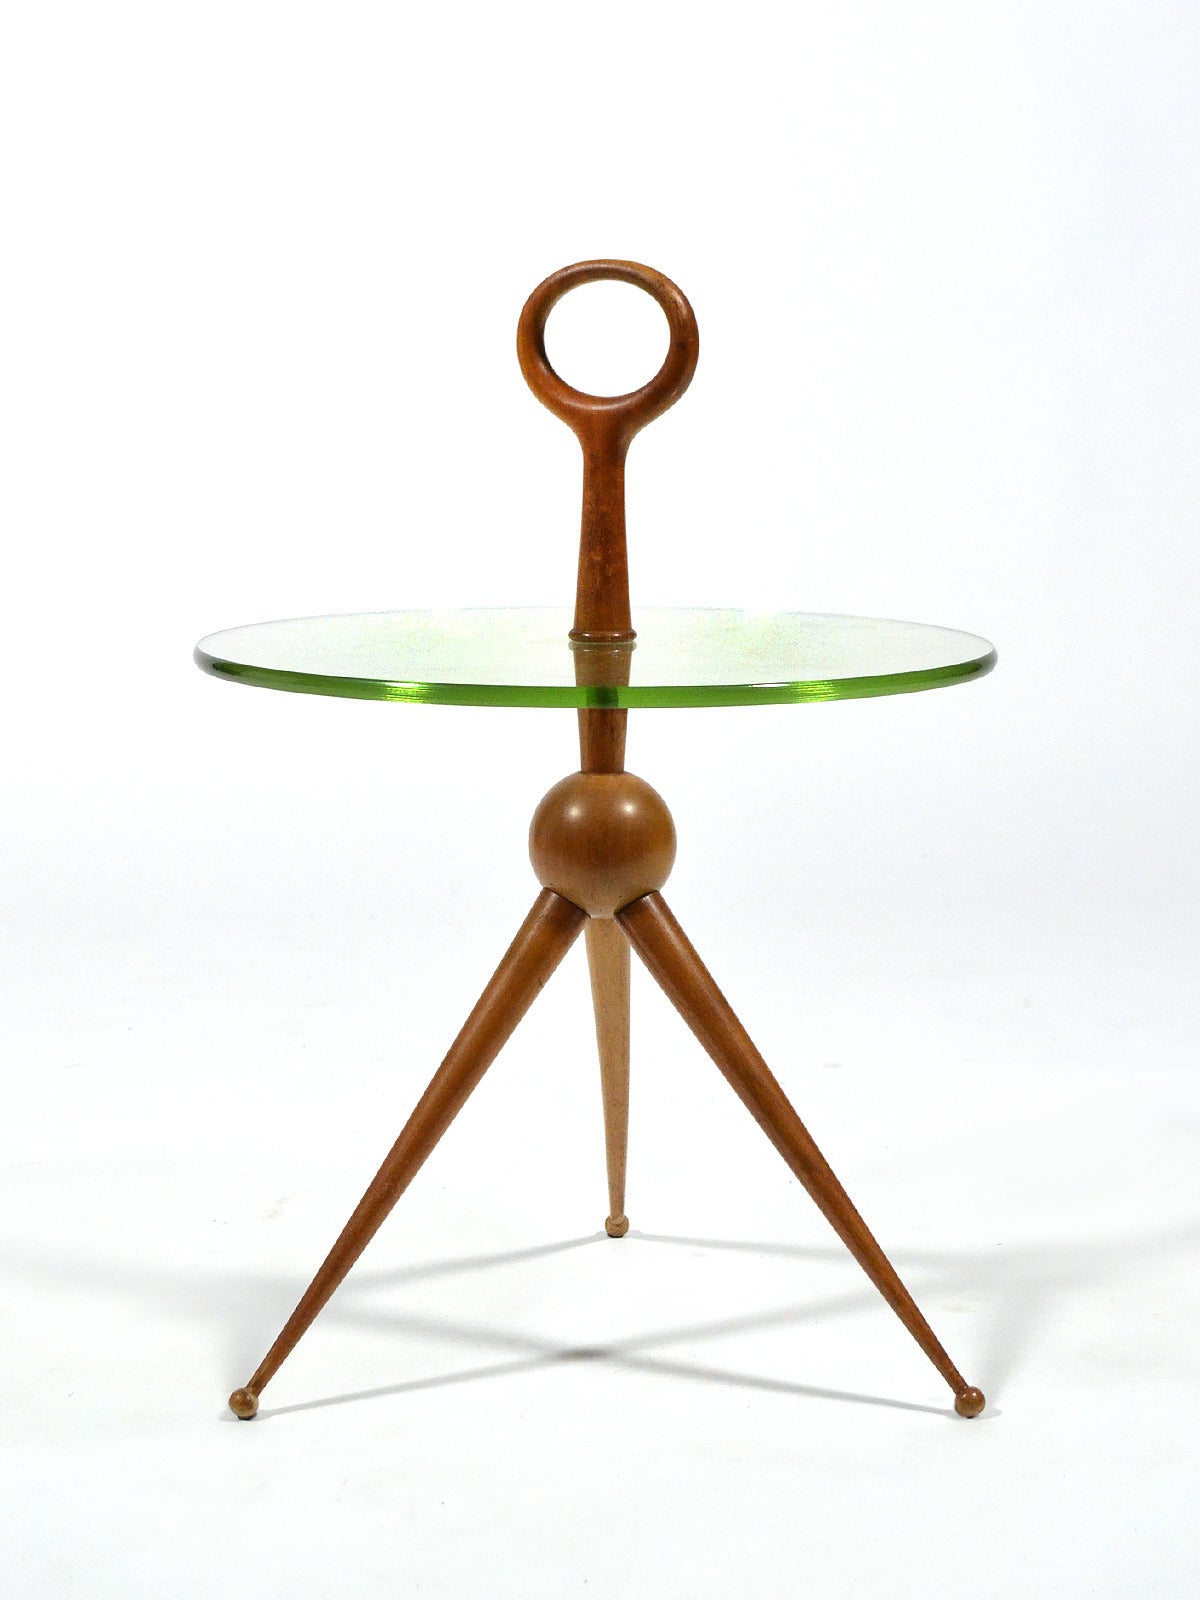 This beautiful little side table is just a perfect piece. A light, playful design with splayed legs connecting at the ball centre supporting a round pale green glass top. The scale and the integrated handle make it highly functional as well as